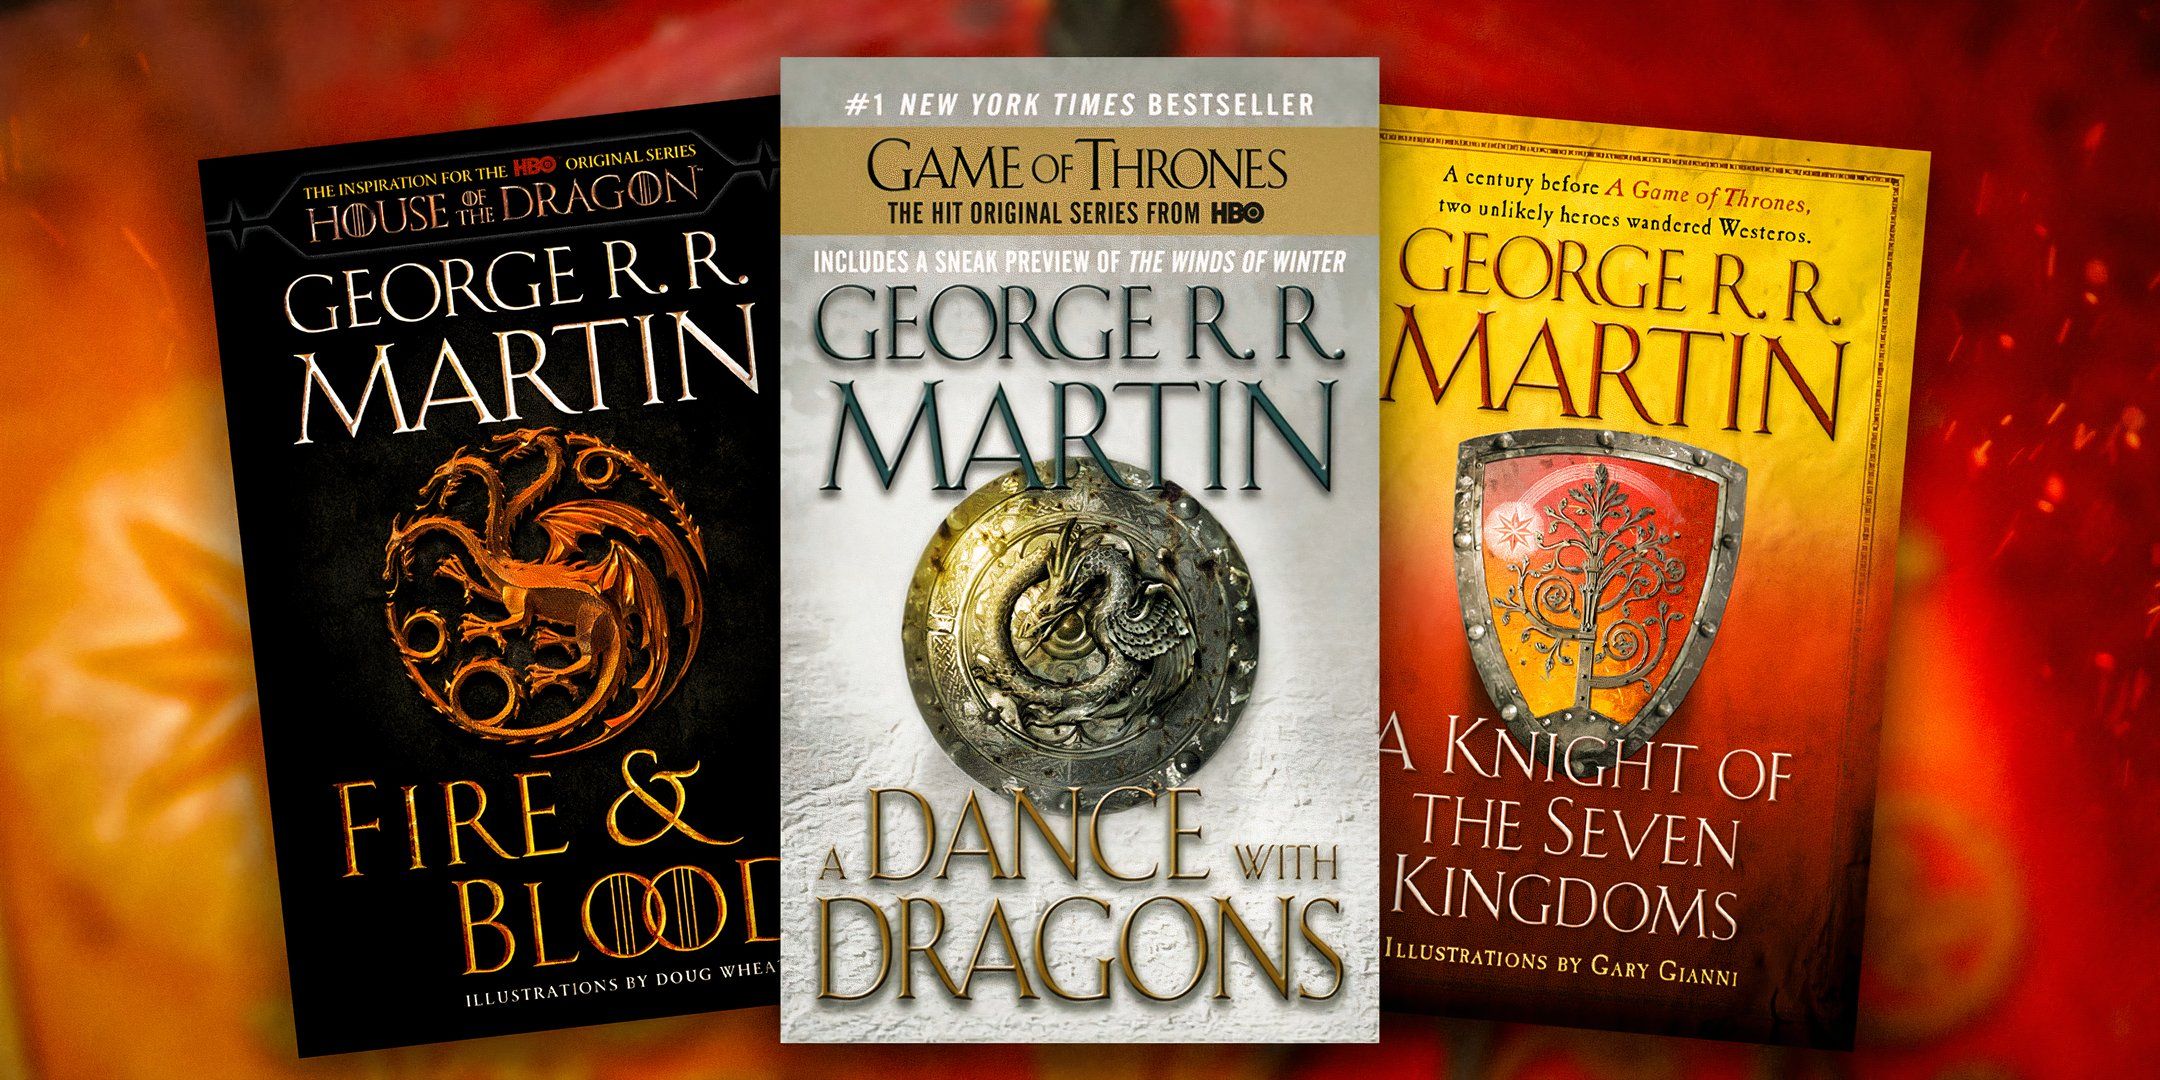 A Song of Ice & Fire book covers